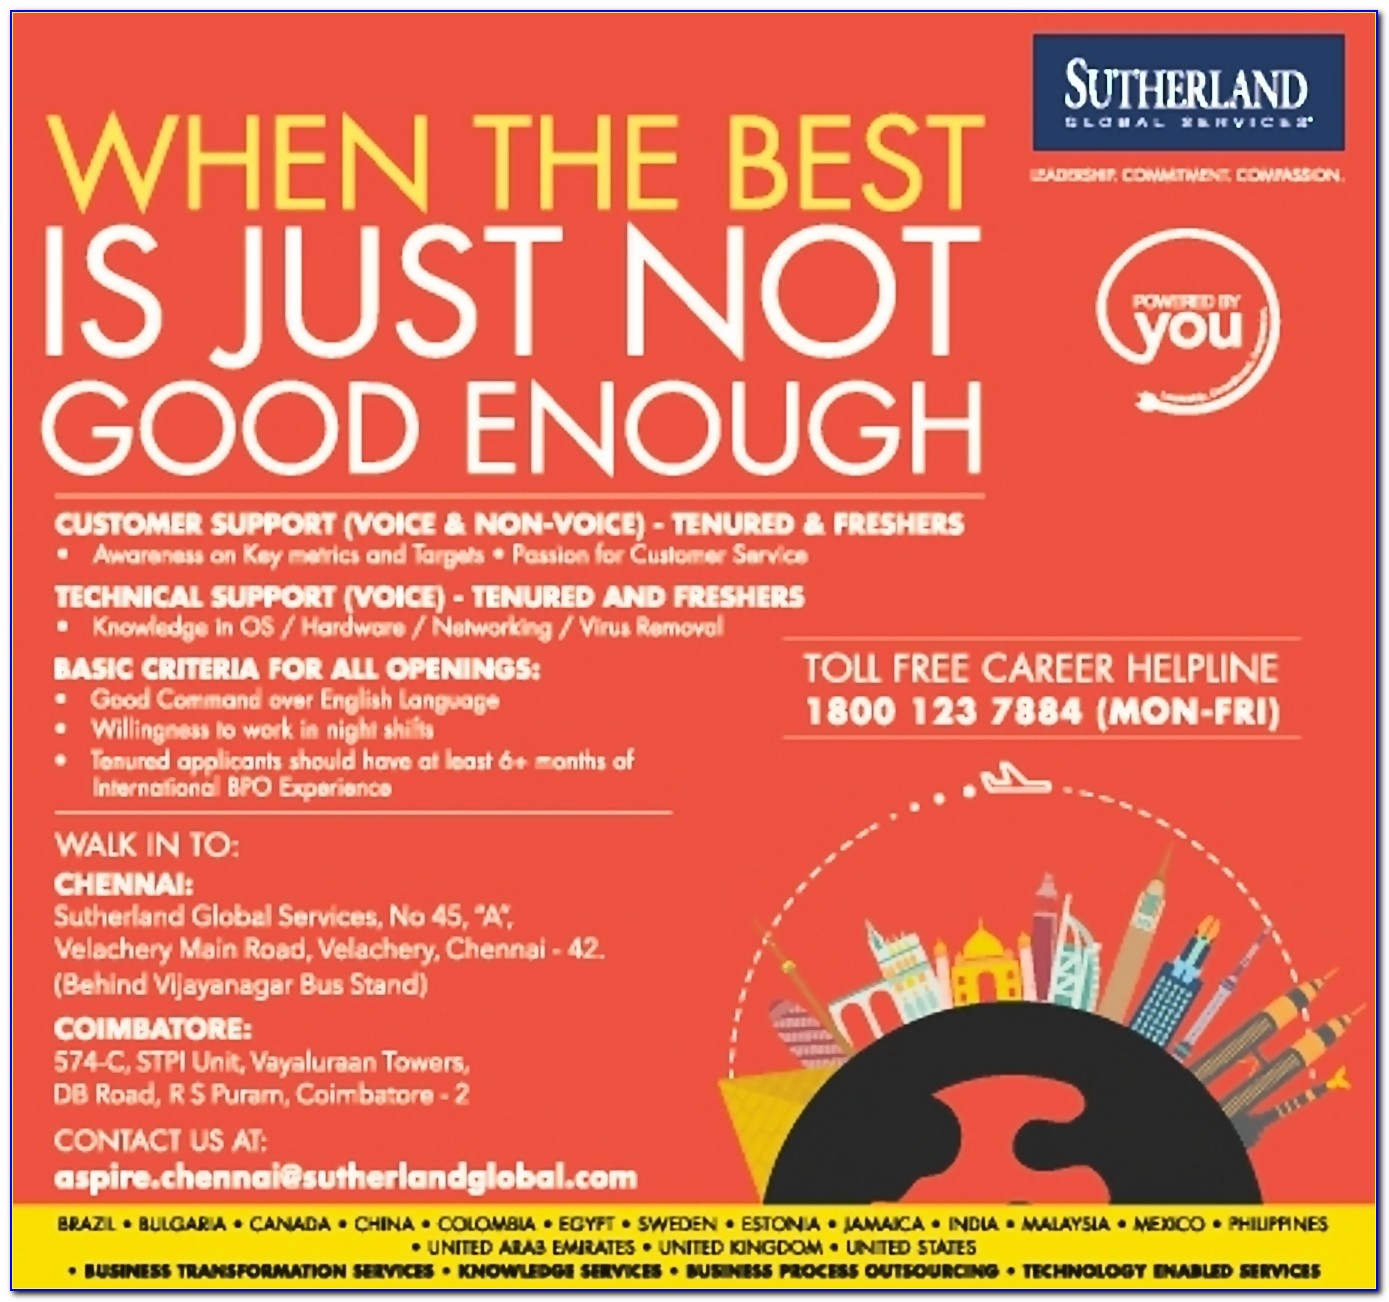 Sutherland Global Services Job Openings In Chennai